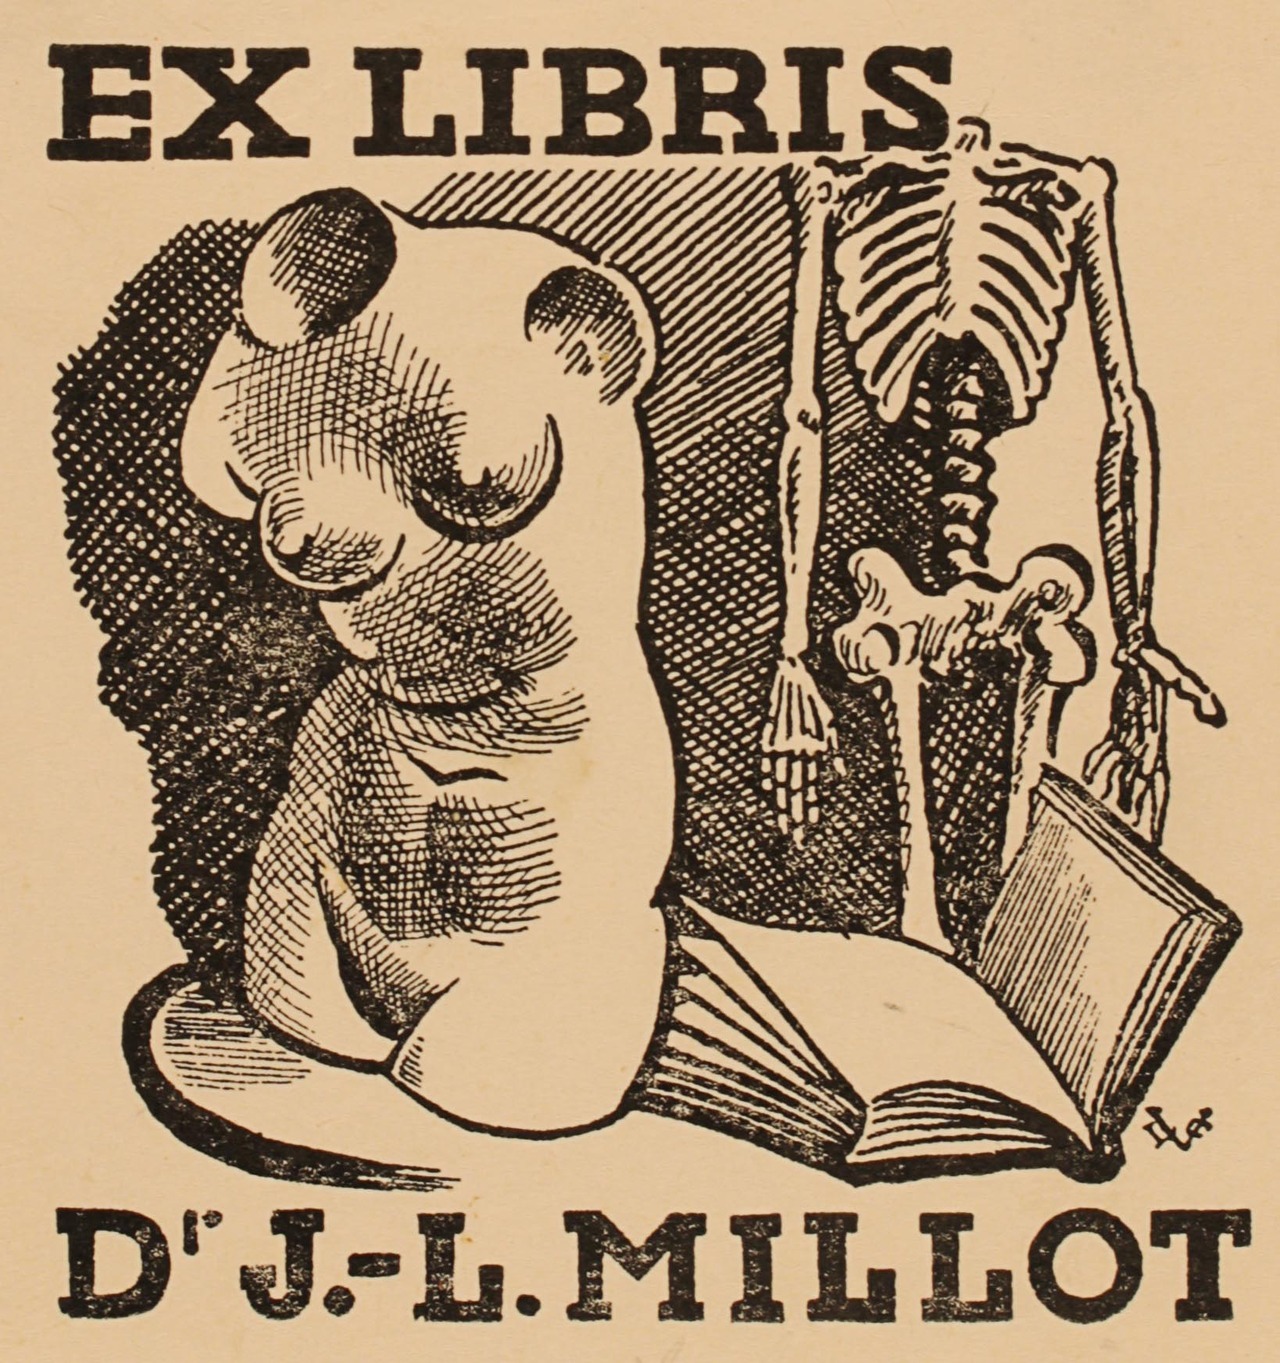 Dr. J.-L. Millot. Artist: Valentin Le Campion (French, 1903-1952). Bookplate.
A nude sculpture, an open book, and a skeleton, representing death, are included in this still-life bookplate.